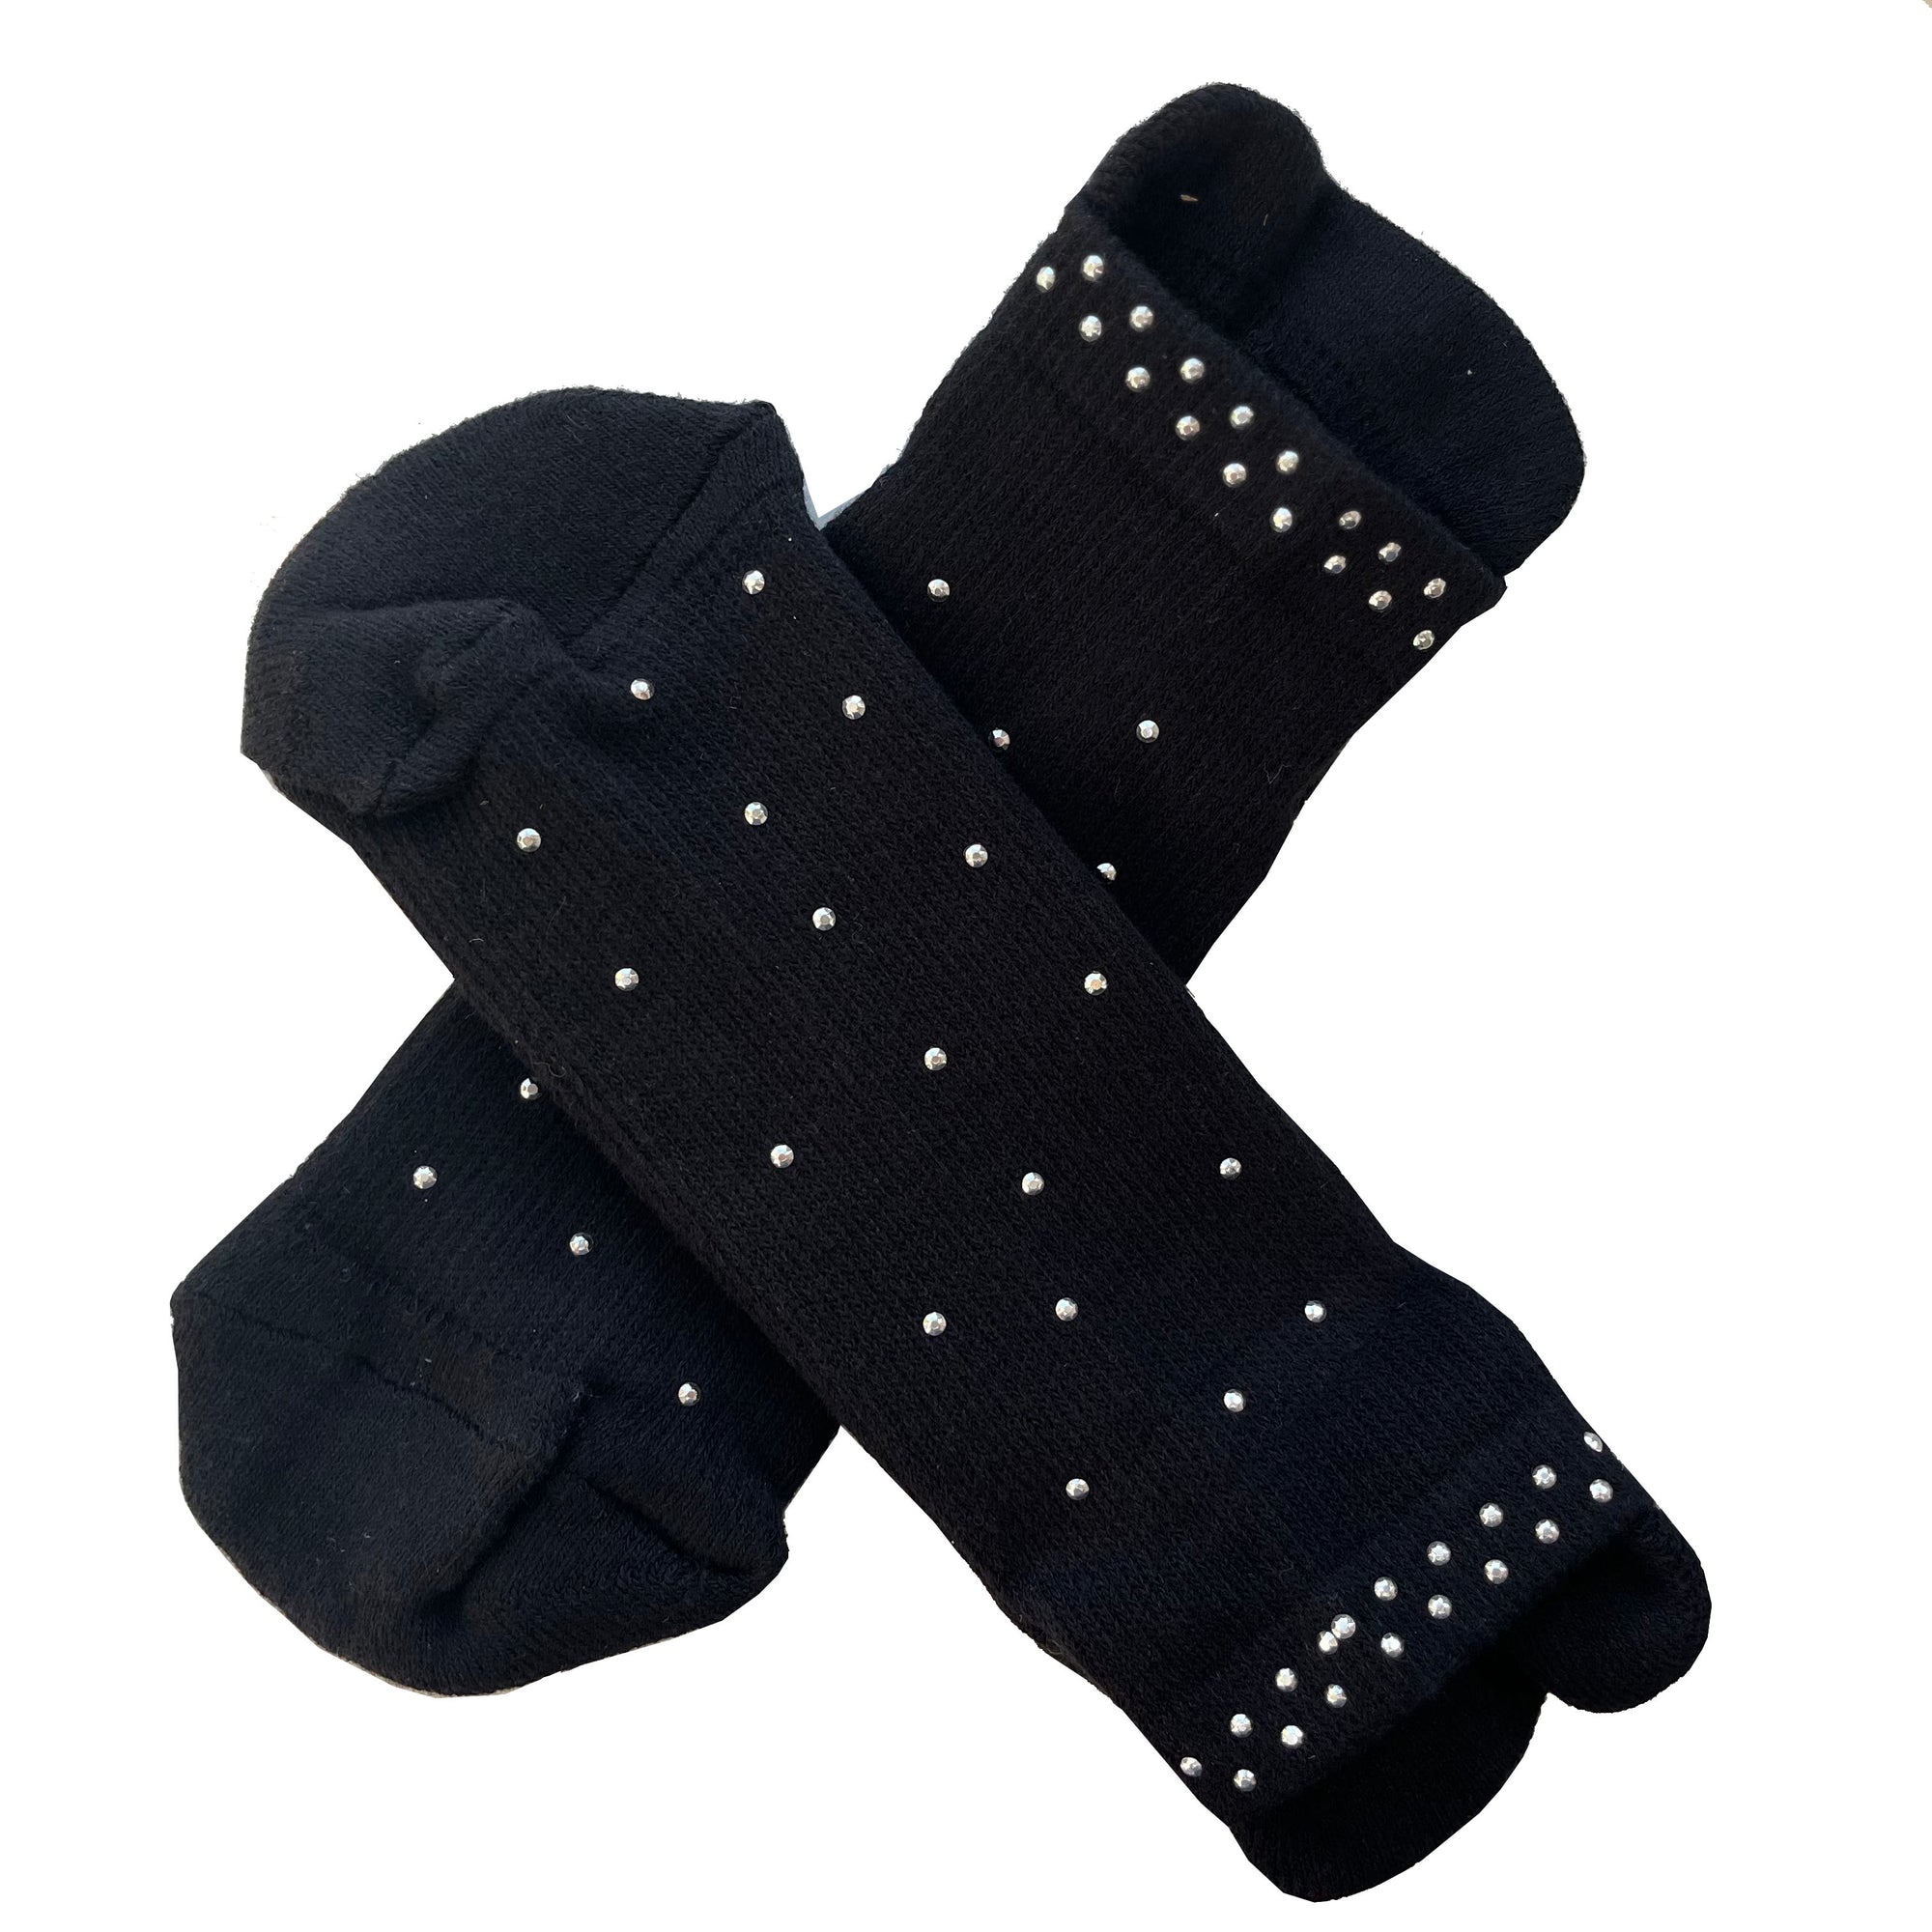 Riley all over studded black tab back non slip grip sock barre,pilates and for at home